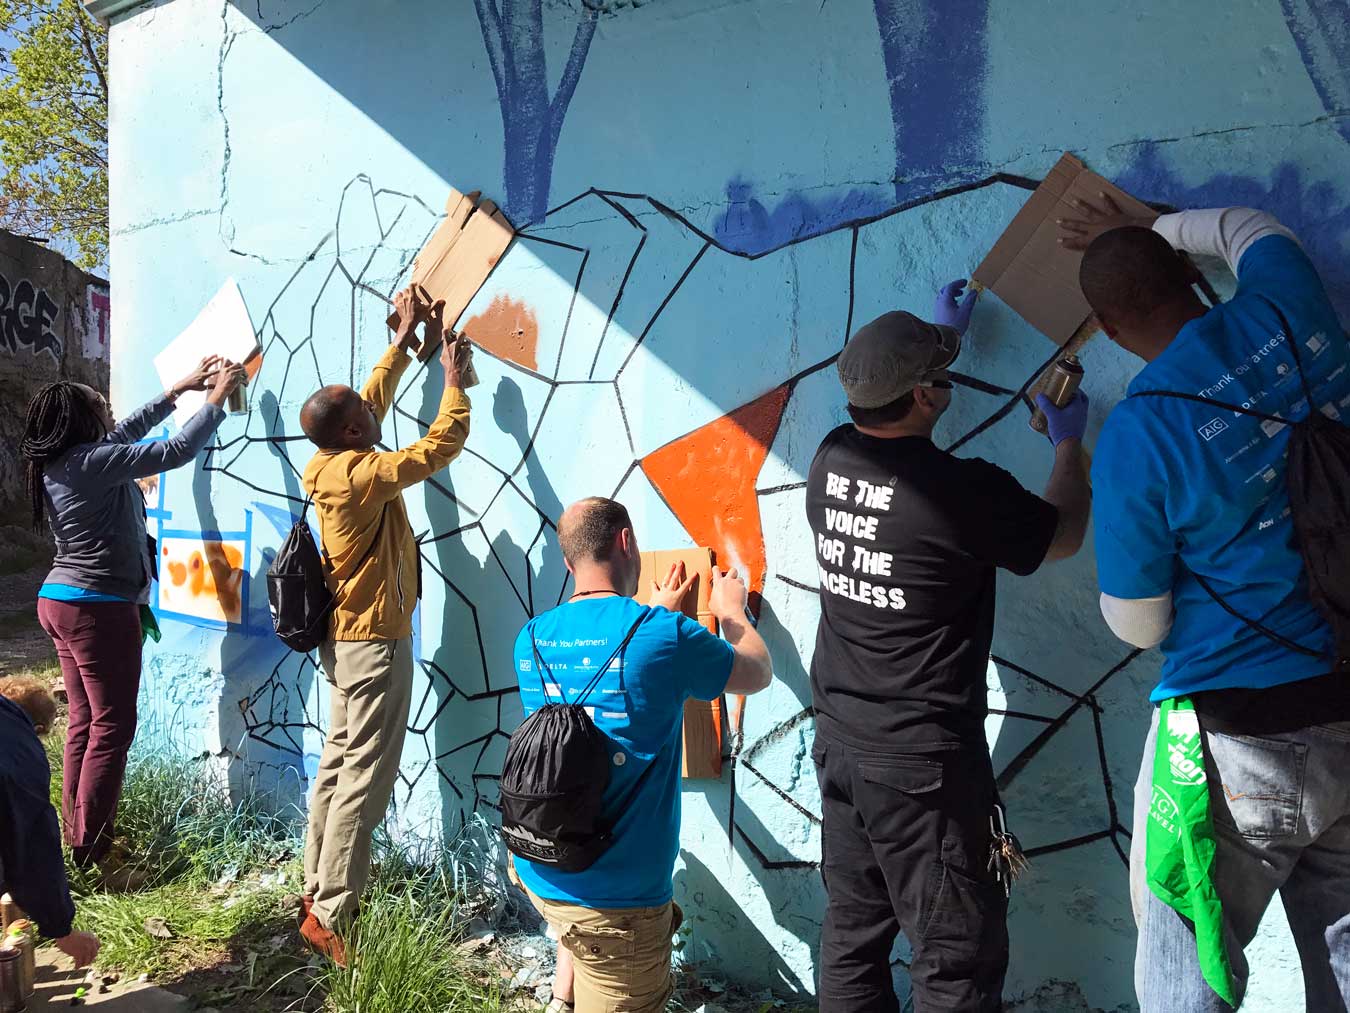 Tourism Cares For Detroit: Graffiti For A Cause (via Wading in Big Shoes) - Graffiti mural in Lincoln Art Park by Fel3000ft and a team of travel & tourism volunteers. Click through to learn more about the mural and revitalization efforts in Detroit!